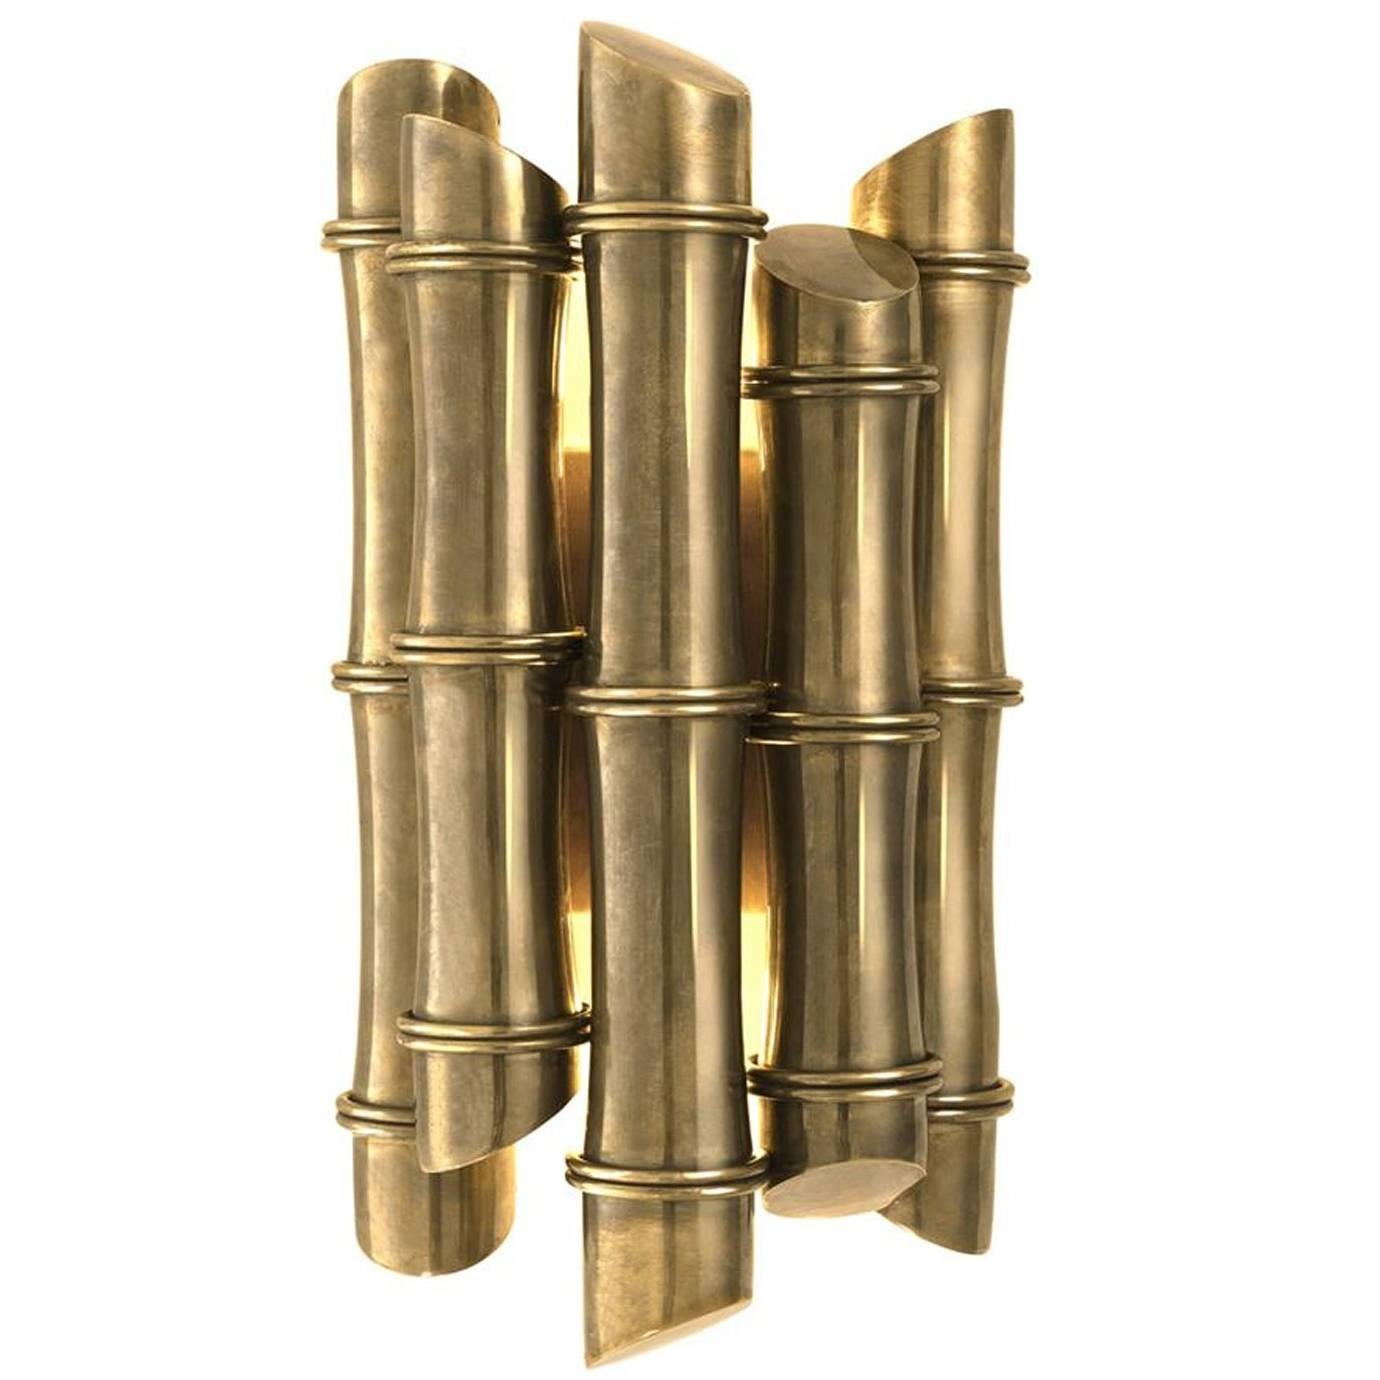 Spa Wall Light in Vintage Brass or Polished Stainless Steel Finish